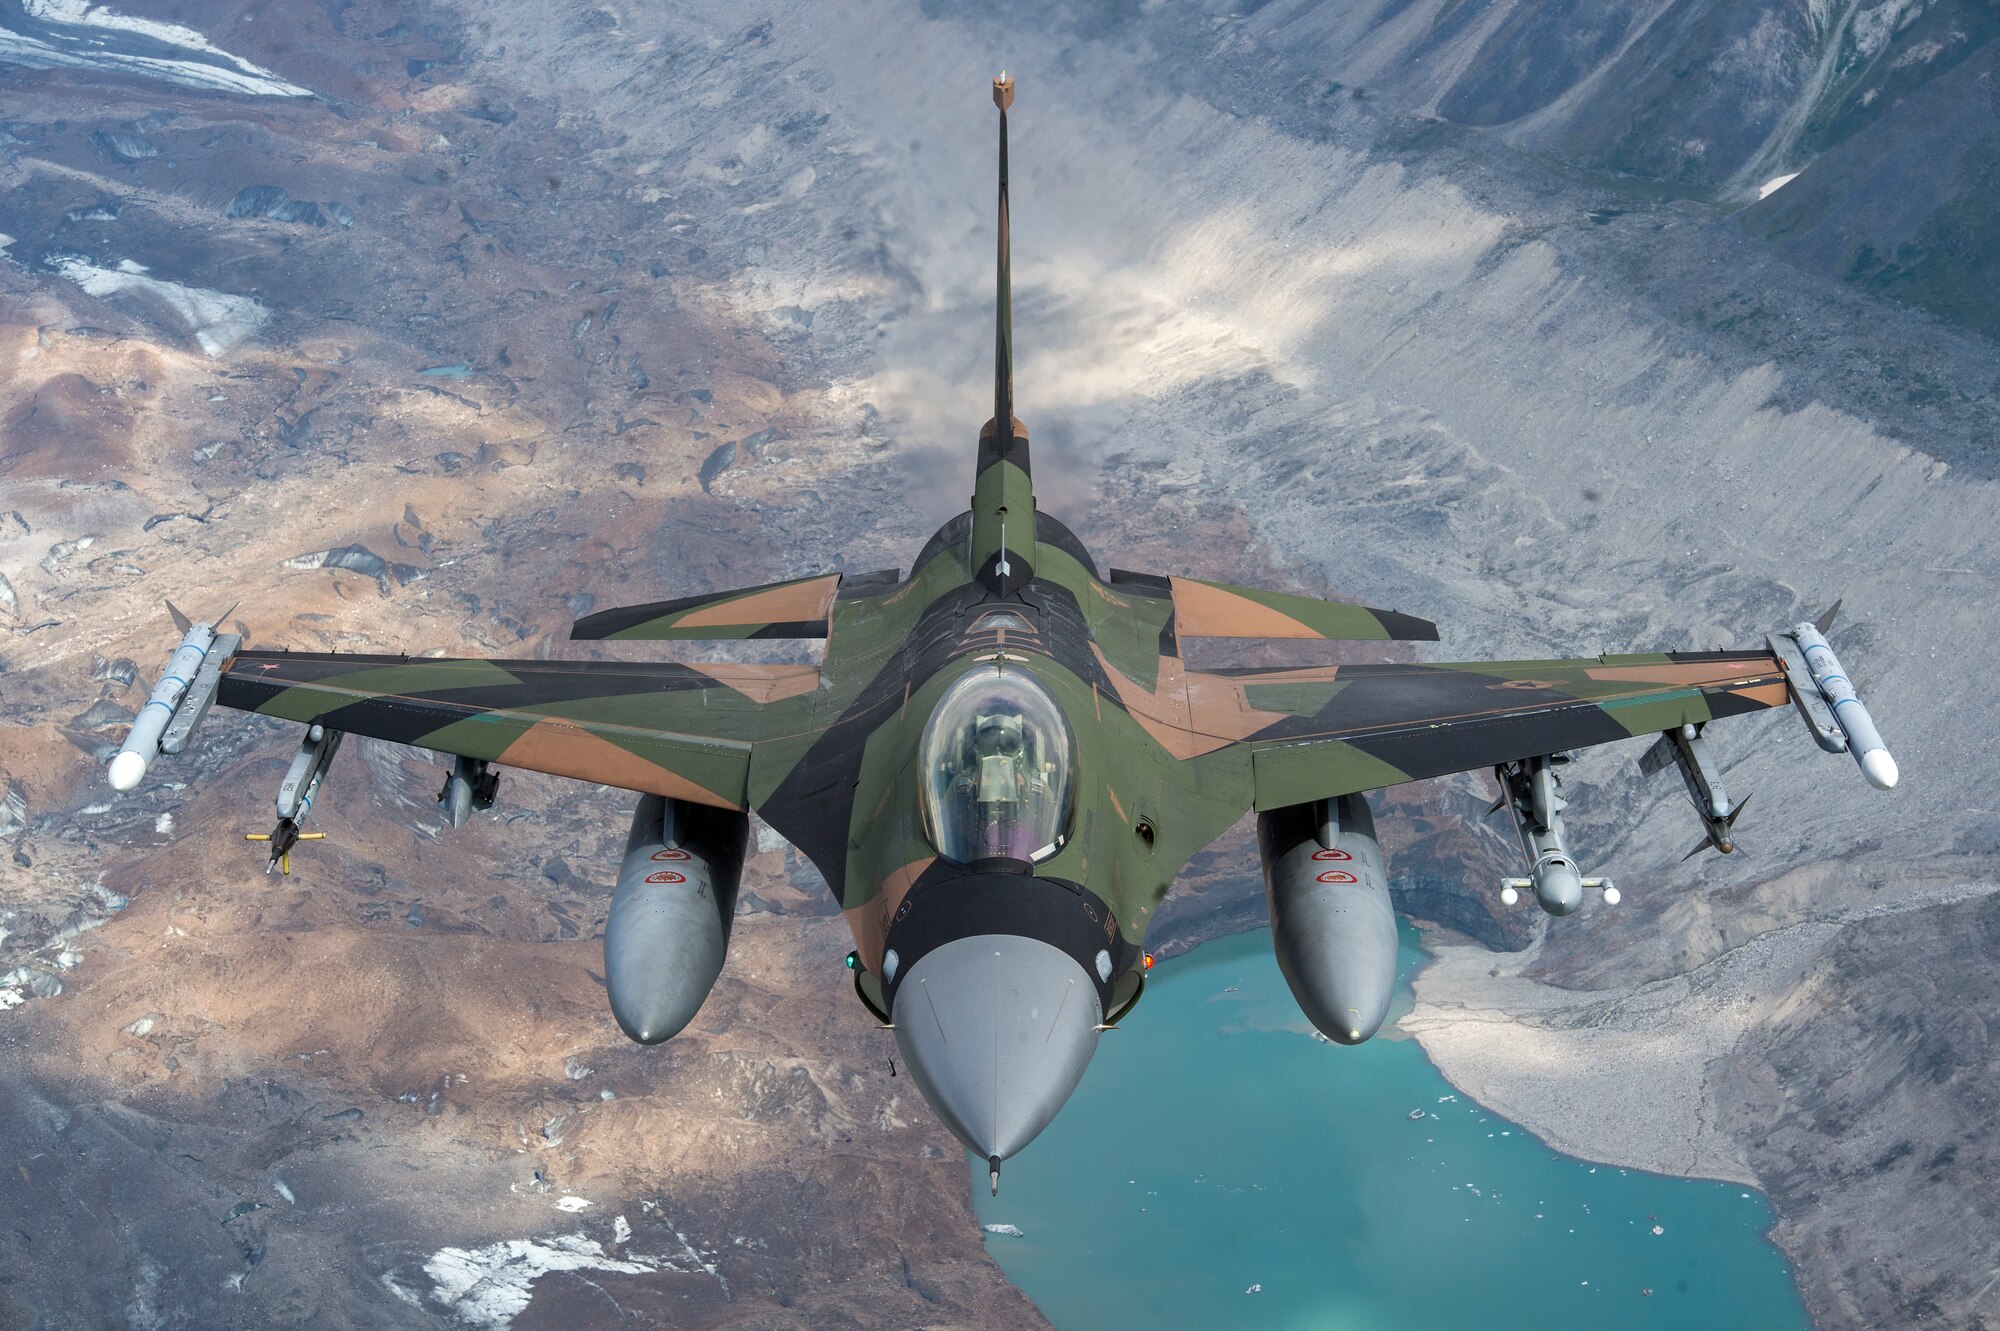 A U.S. Air Force F-16 Fighting Falcon from Eielson Air Force Base, flies in formation over the Joint Pacific Alaska Range Complex, July 18, 2019.